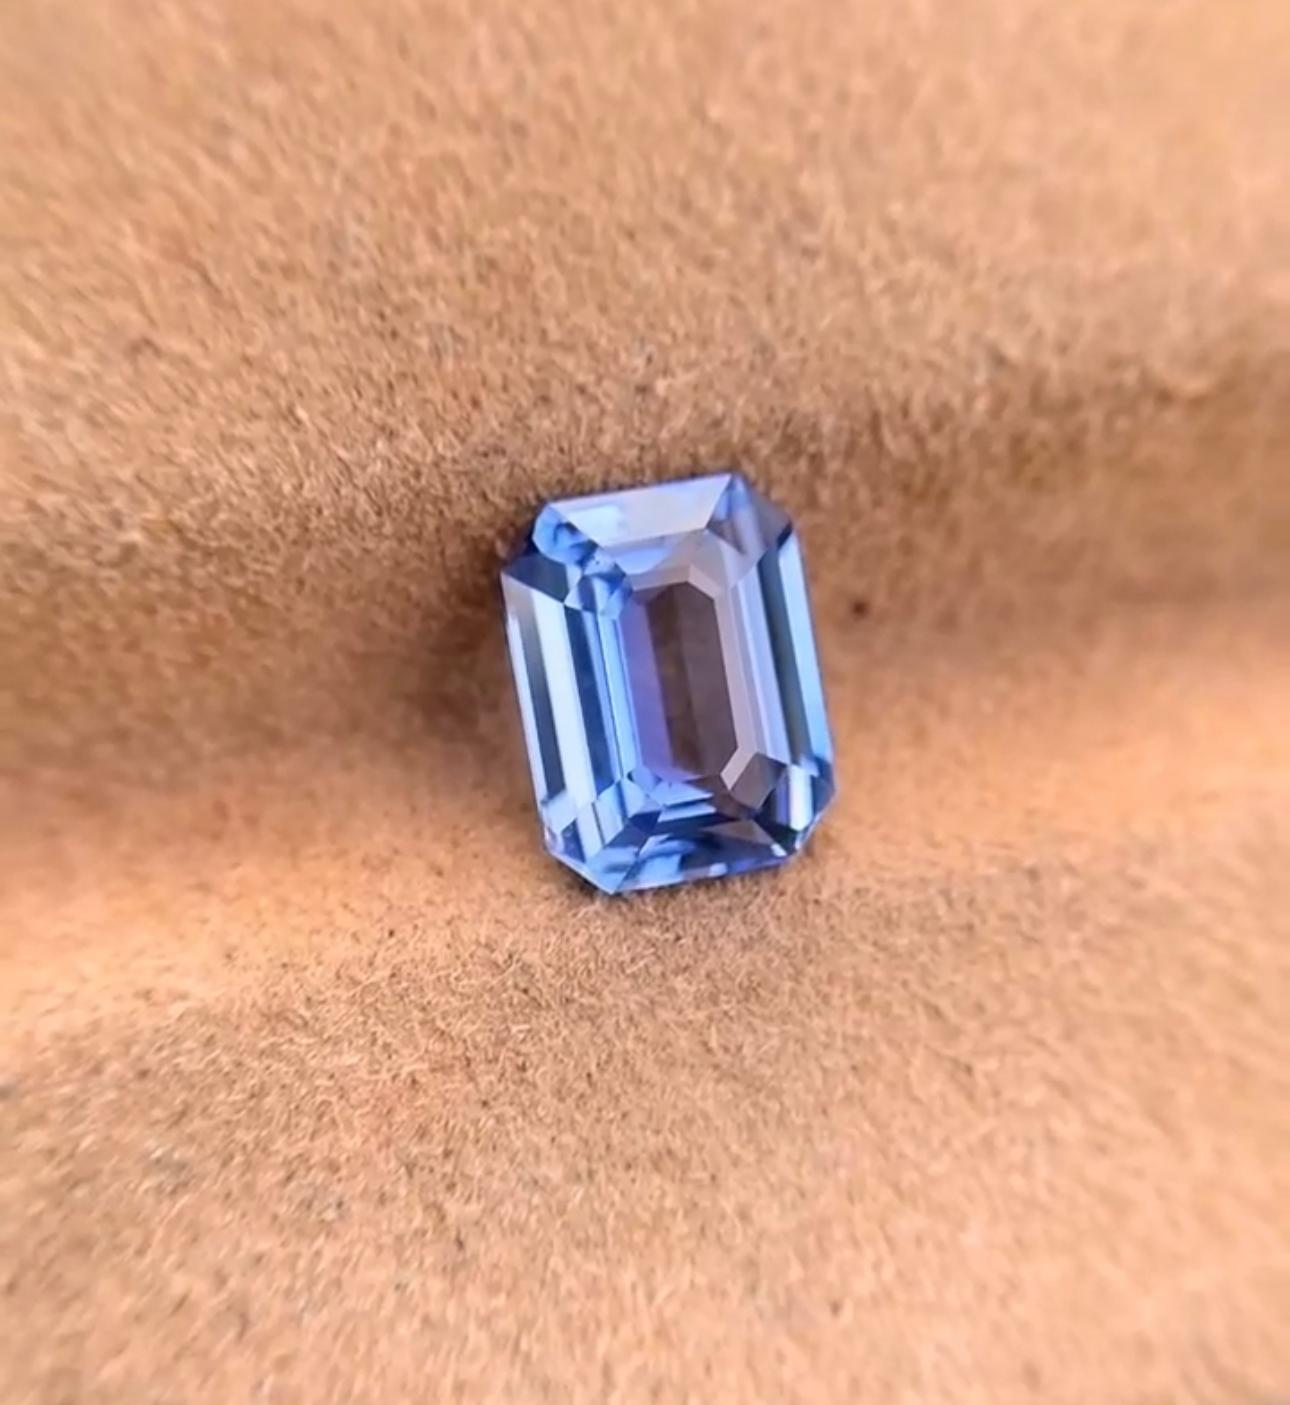 Stunning natural certified Cornflower Blue sapphire, Emerald cut - NO HEAT. 

The blue sapphire is certified and is unheated, just as nature created it. The brilliance of this stone is spectacular, it is a very lively sapphire. The cutting style is